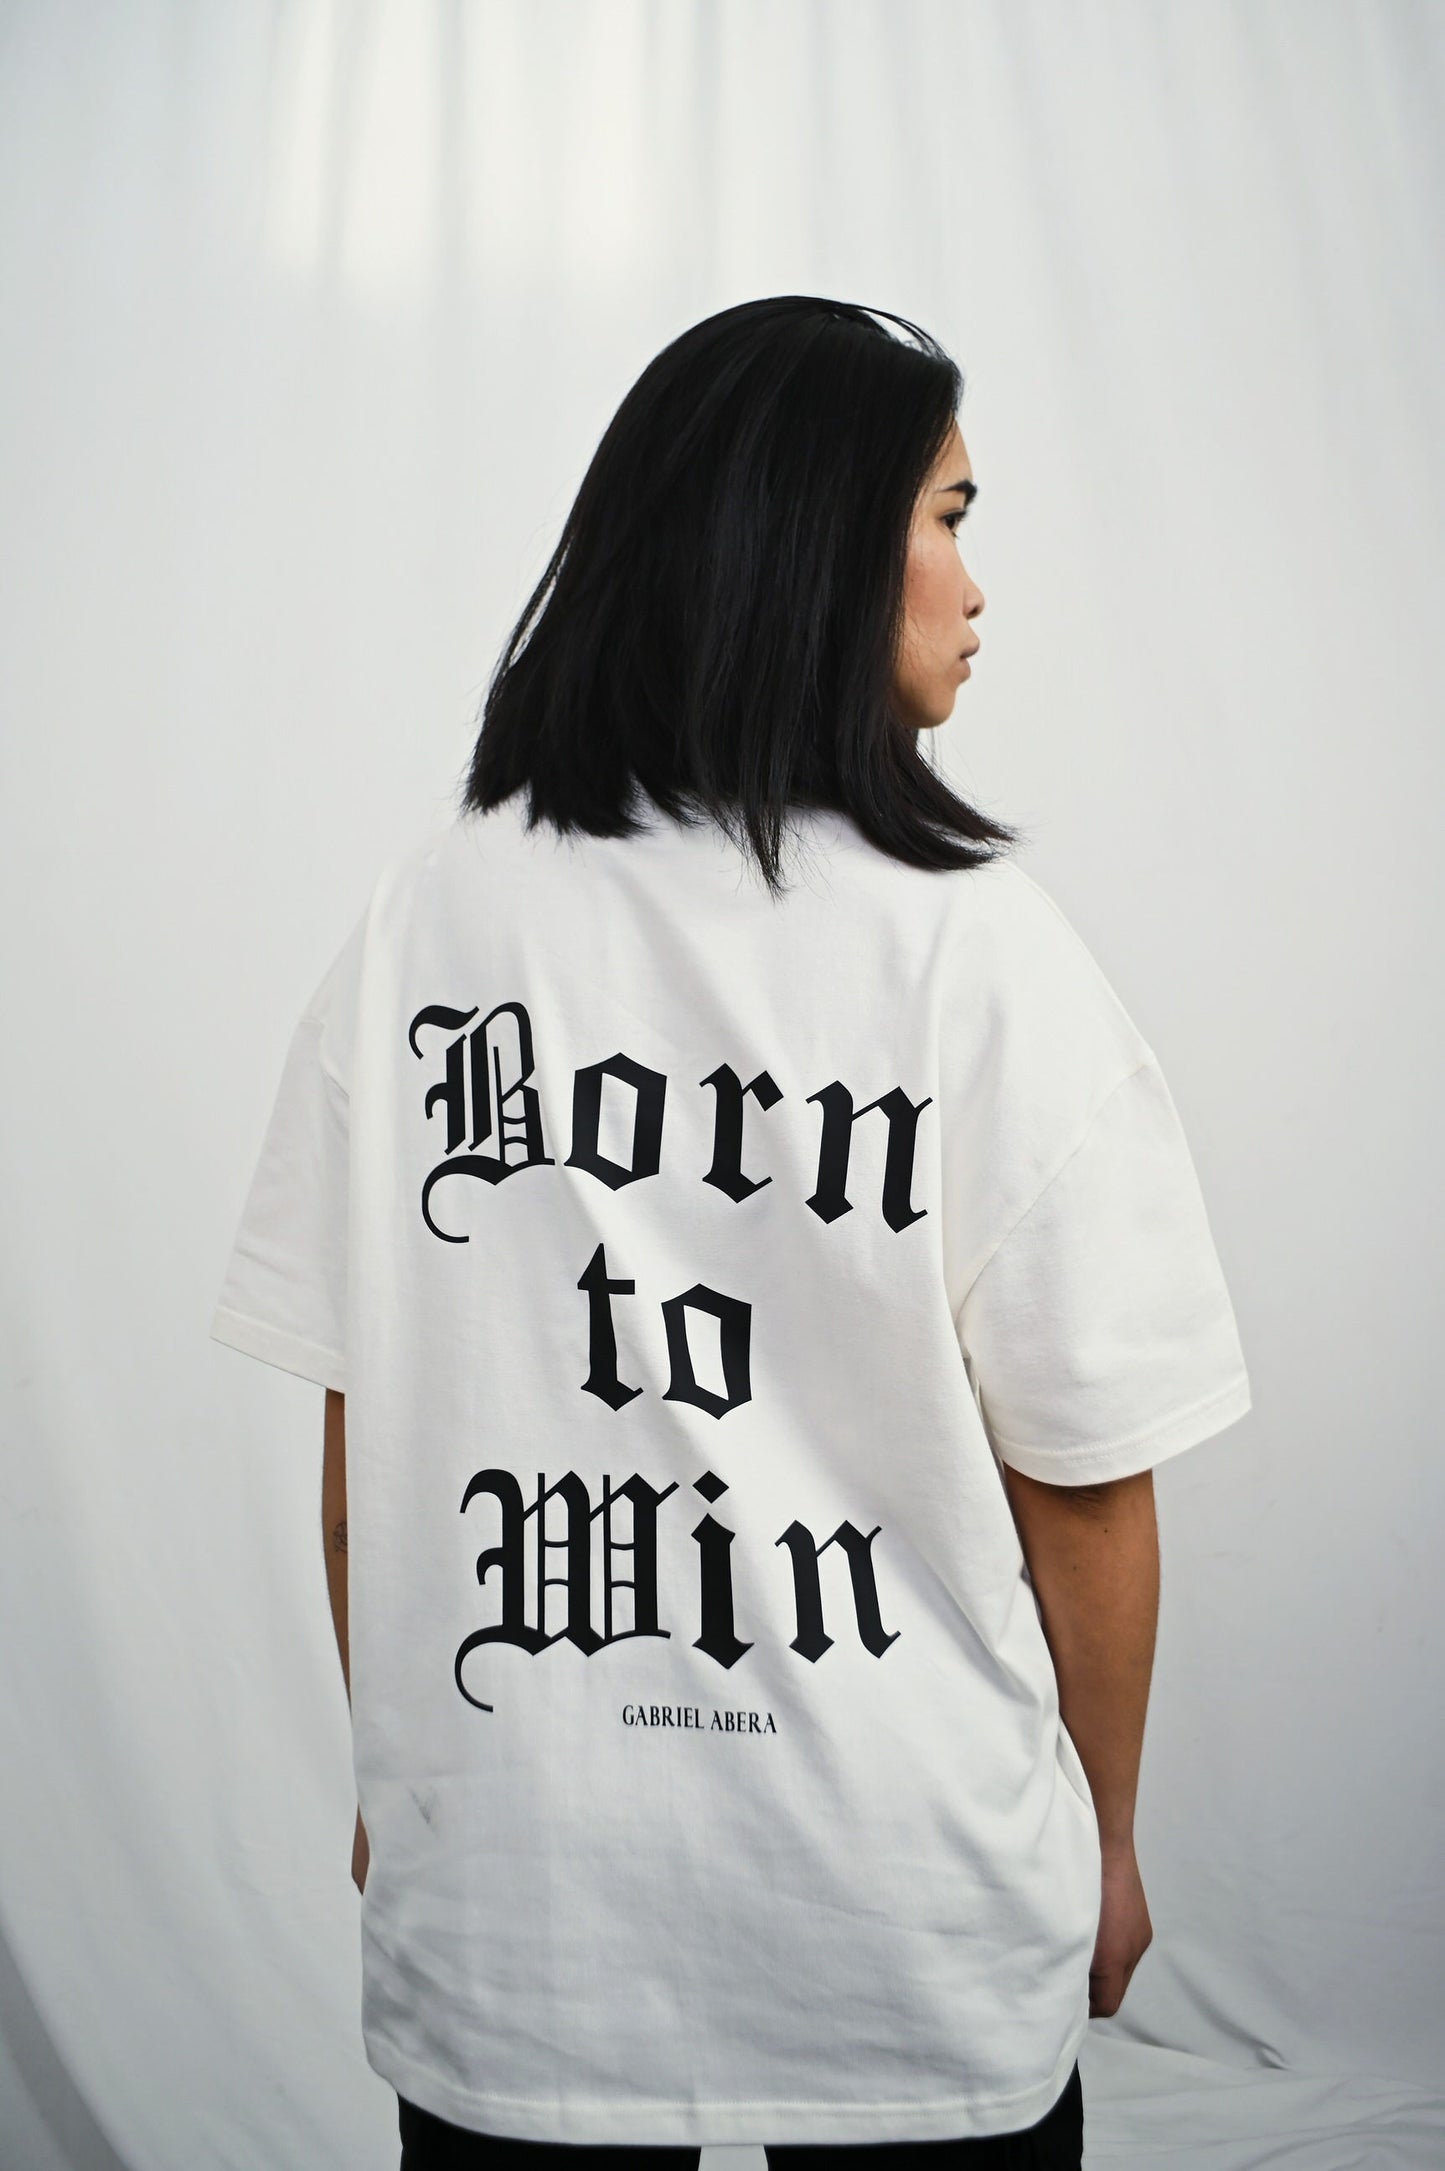 Female model wearing a white oversize Tshirt with born to win design o nthe back